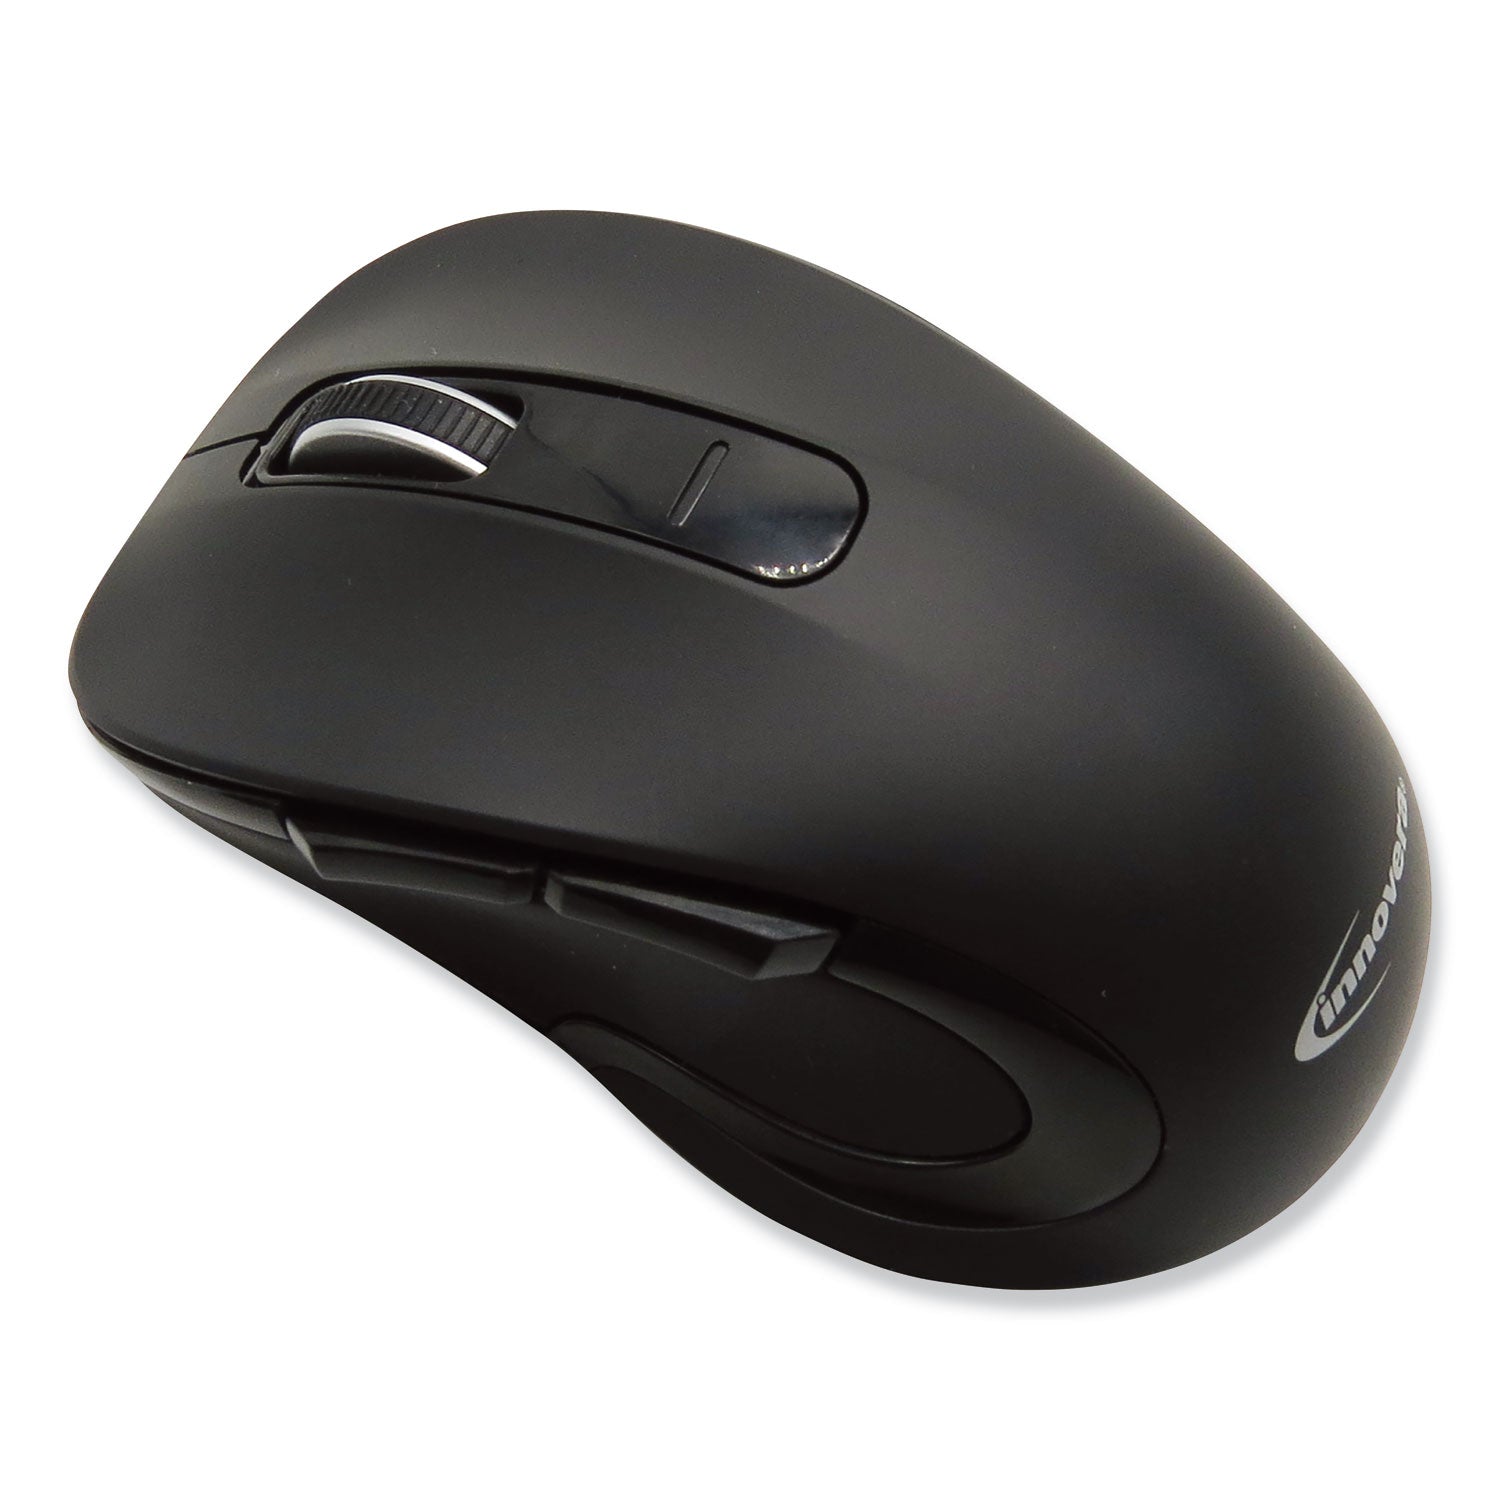 mid-size-wireless-optical-mouse-with-micro-usb-24-ghz-frequency-26-ft-wireless-range-right-hand-use-black_ivr61500 - 1